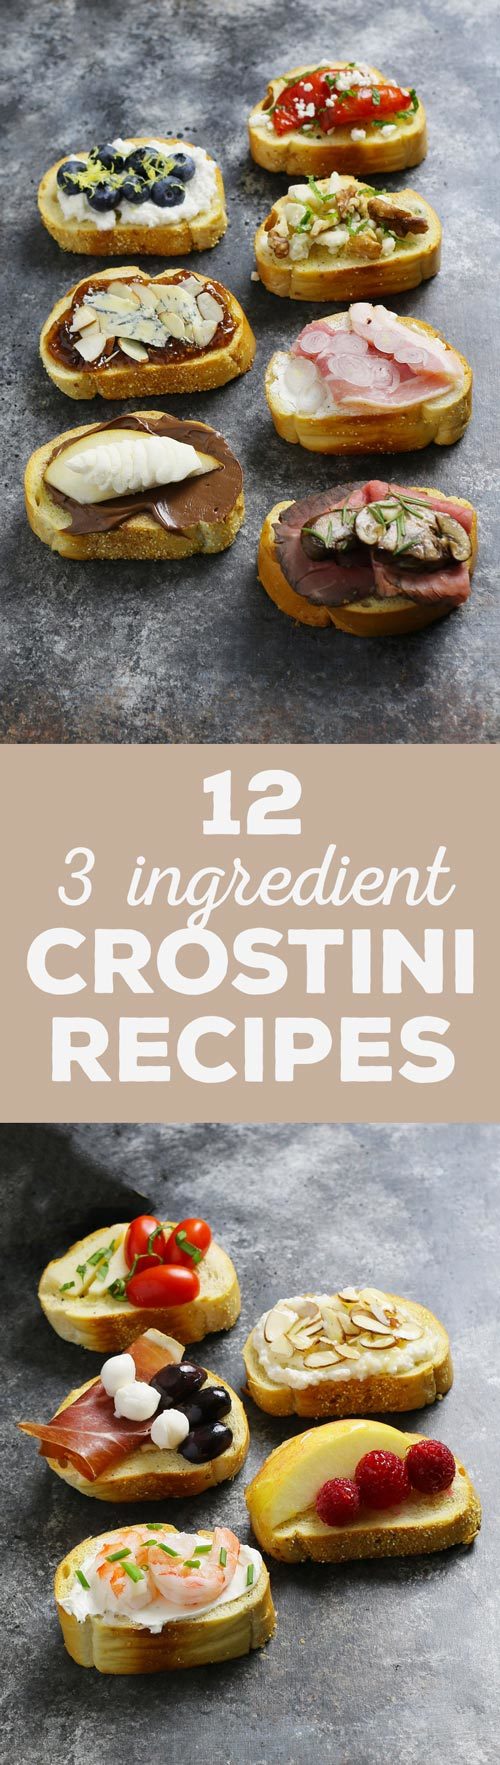 Include a holiday crostini bar at all of your holiday parties this year! These 12 3-ingredient crostini recipes are easy to make! | honeyandbirch.com